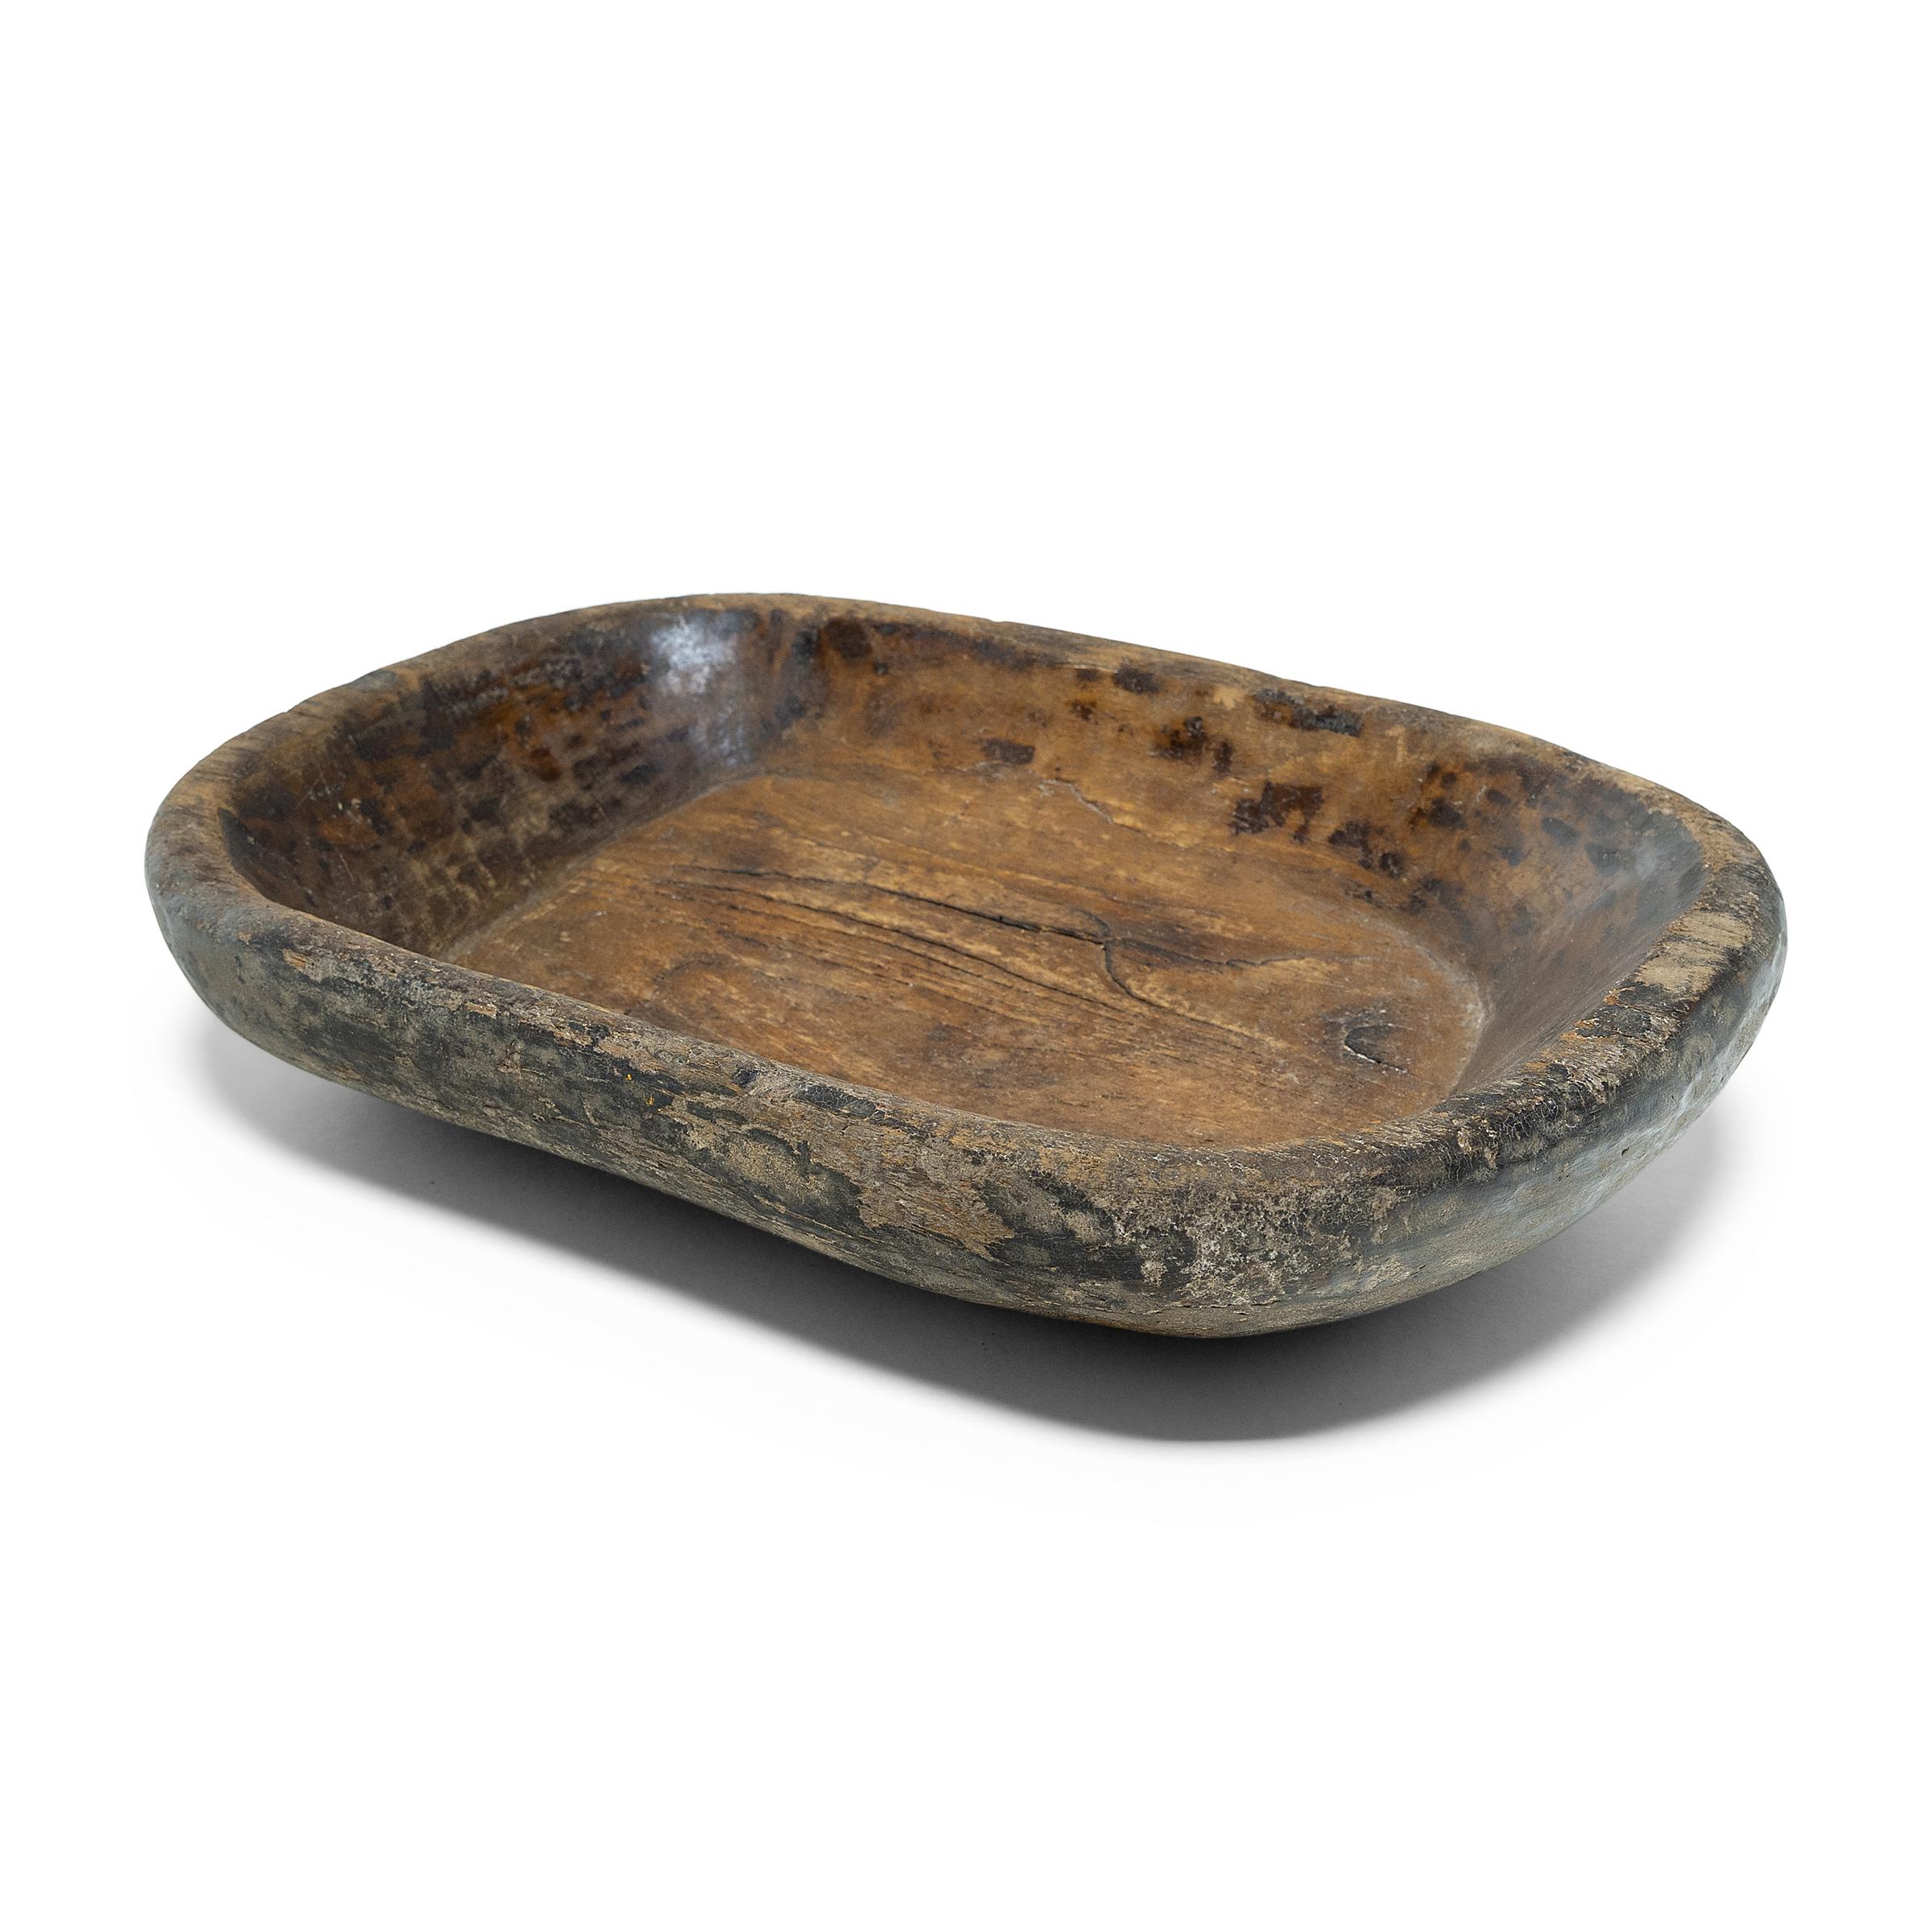 This wooden tray from northern China charms with rustic texture and asymmetric form. Hand-carved from a single block of wood, the tray has an oval shape with rounded corners and short, tapered sides. Years of use have weathered the original lacquer